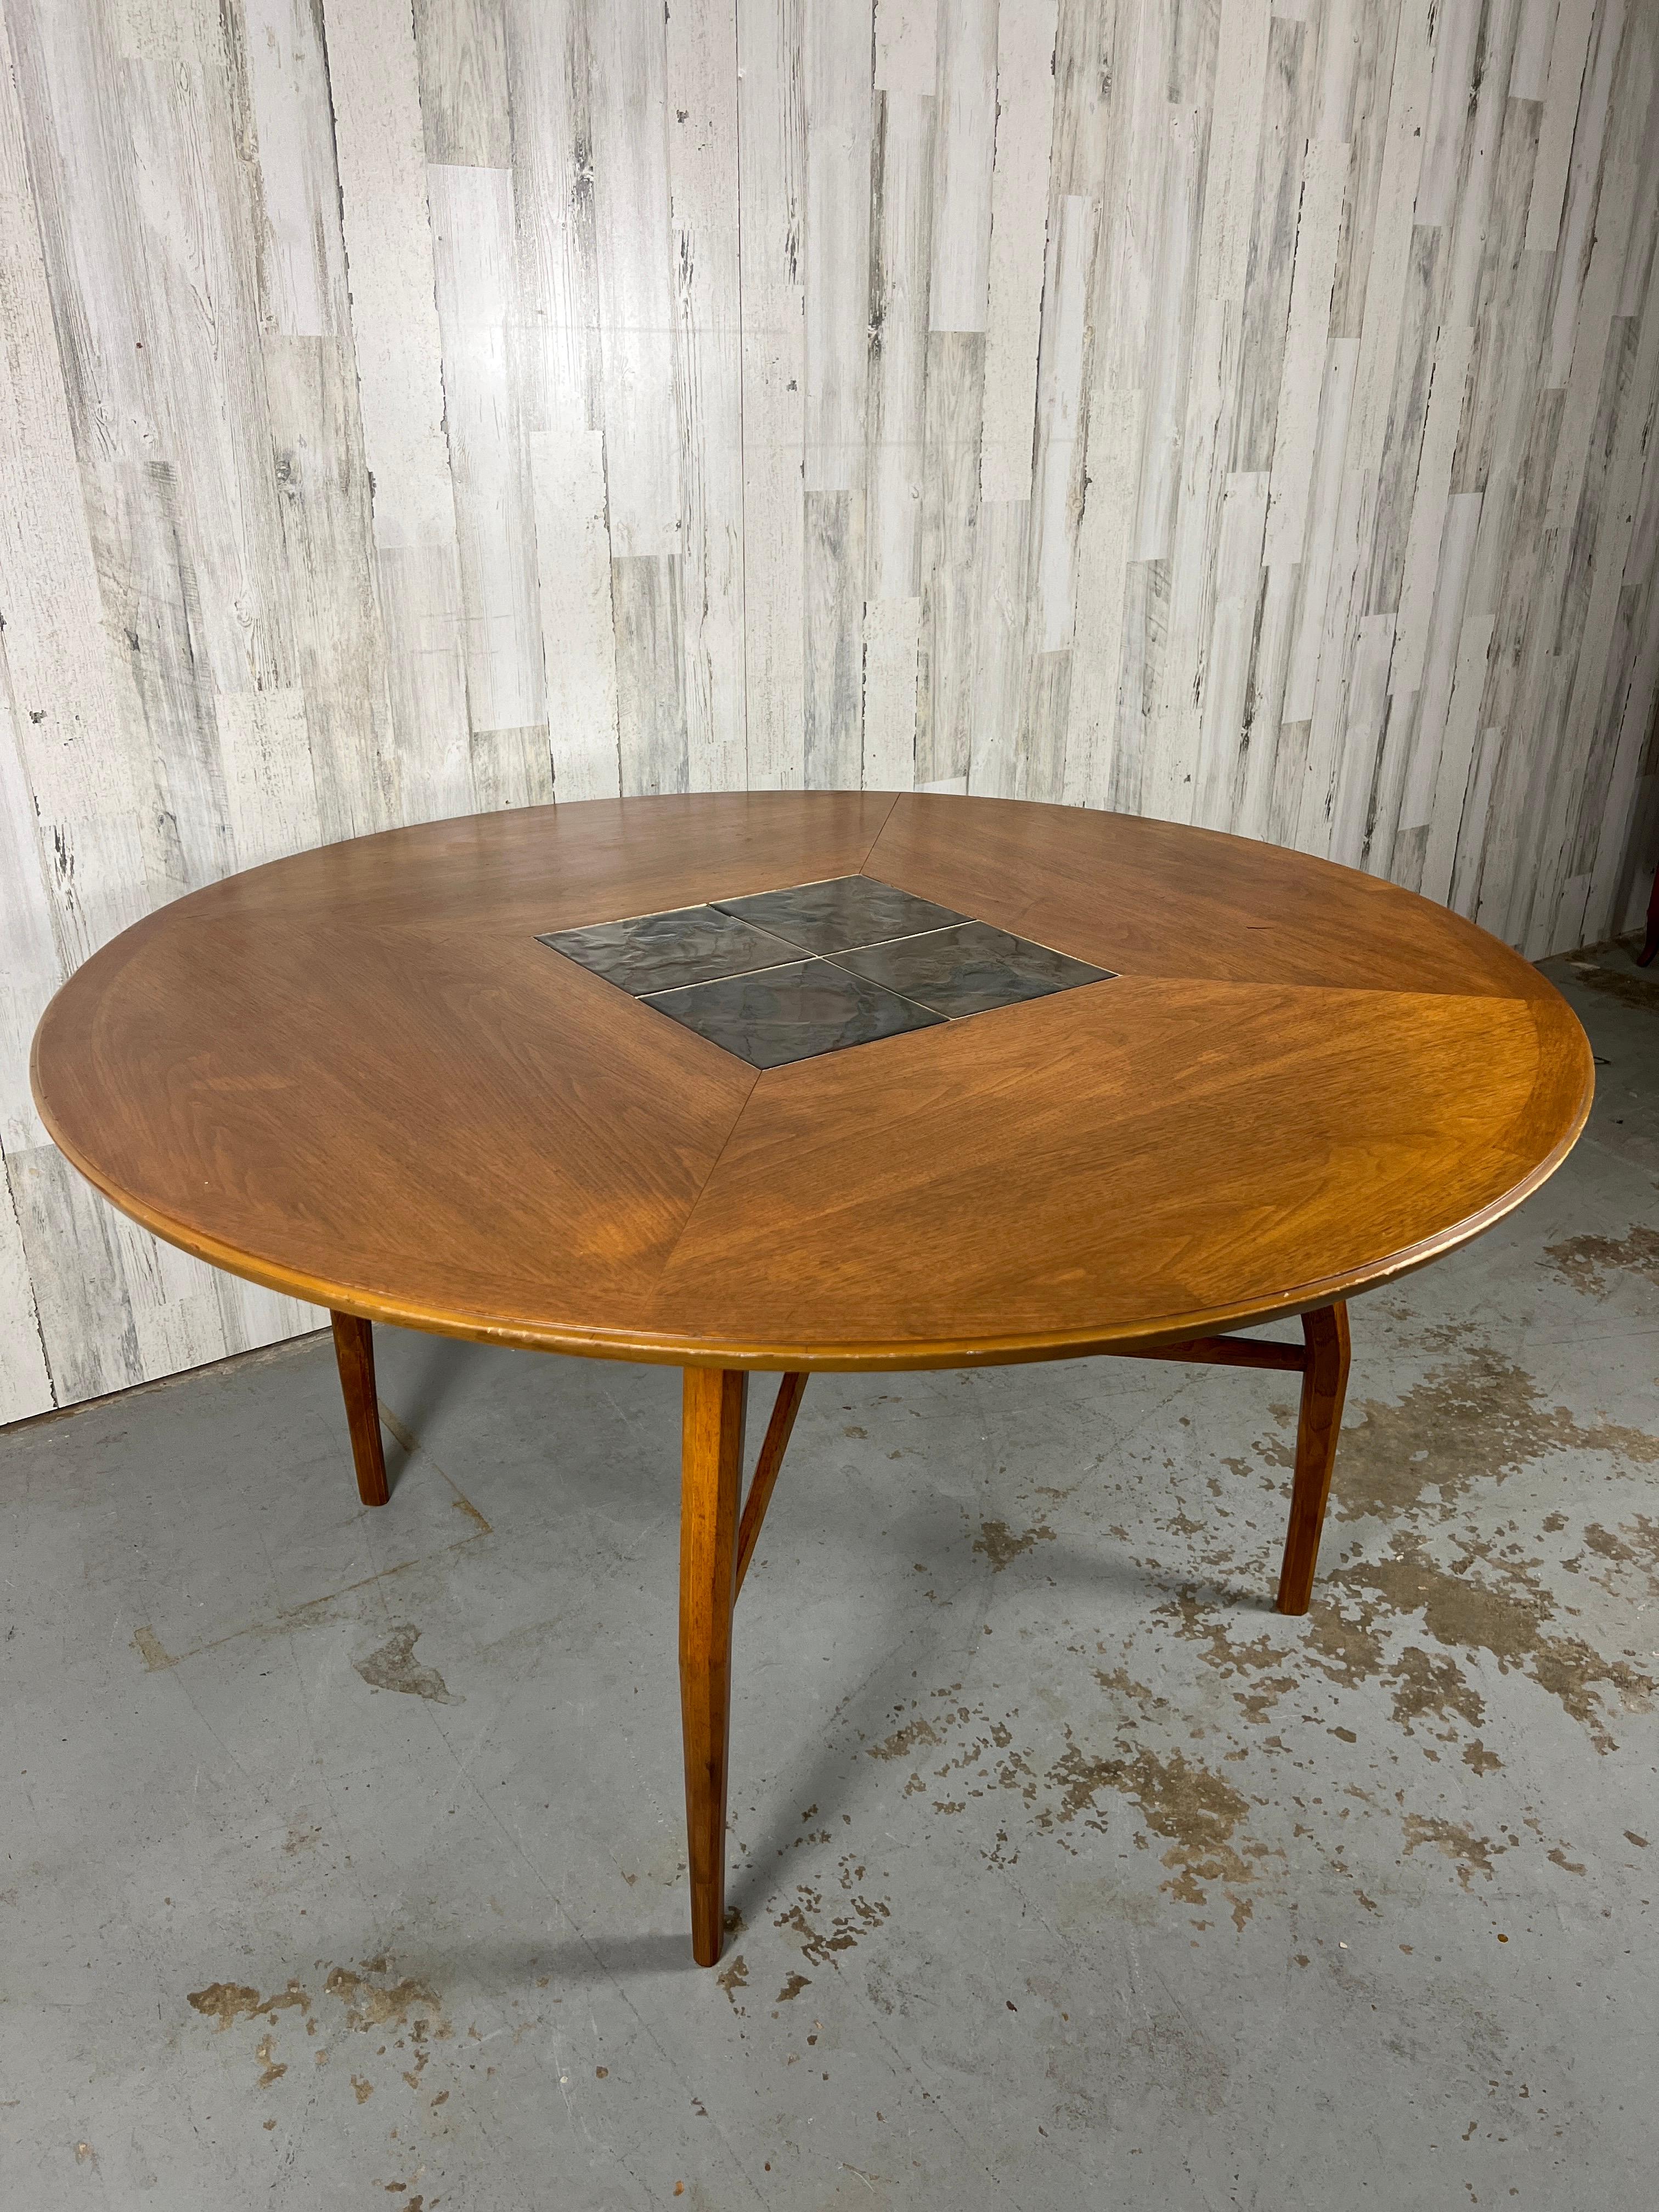 Spider leg style walnut table withe Roma tiles inlaid into the center. X base center stretcher that makes for a very sturdy surface. This table is in all original condition please see pictures. 